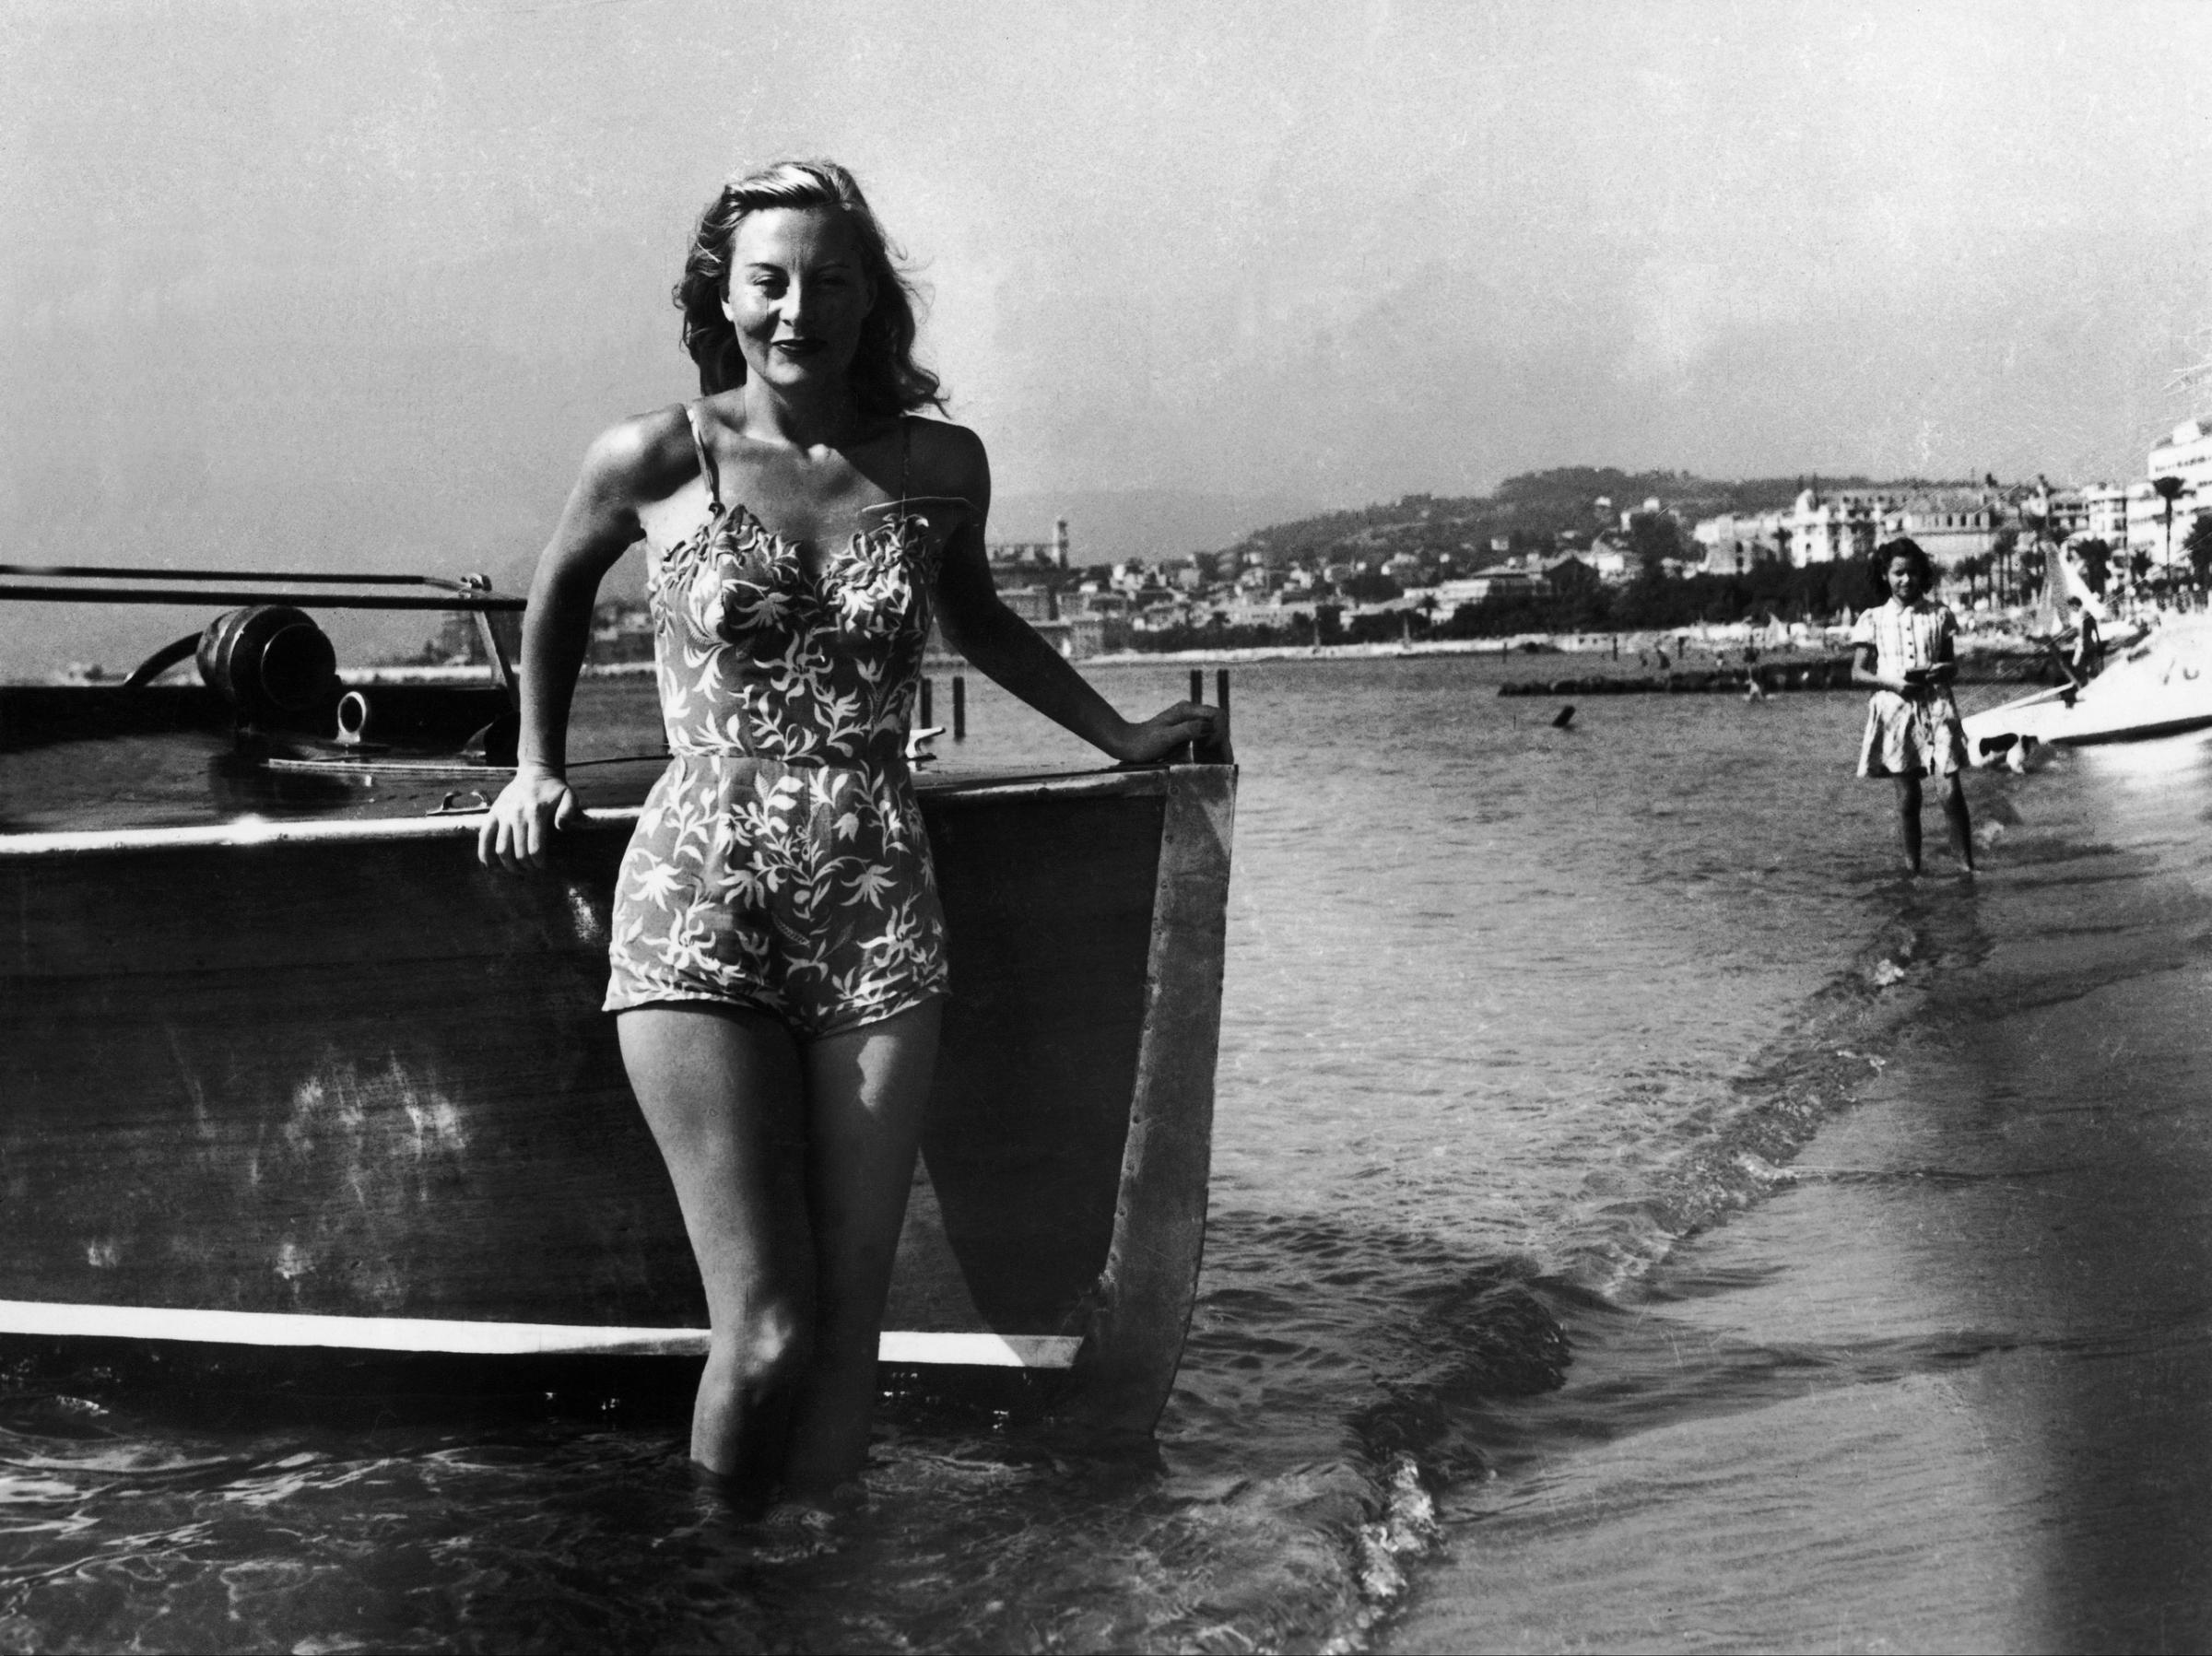 French Actress Michele Morgan poses in a bathing suit at the 1st Cannes Film Festival in Cannes, France in 1946.